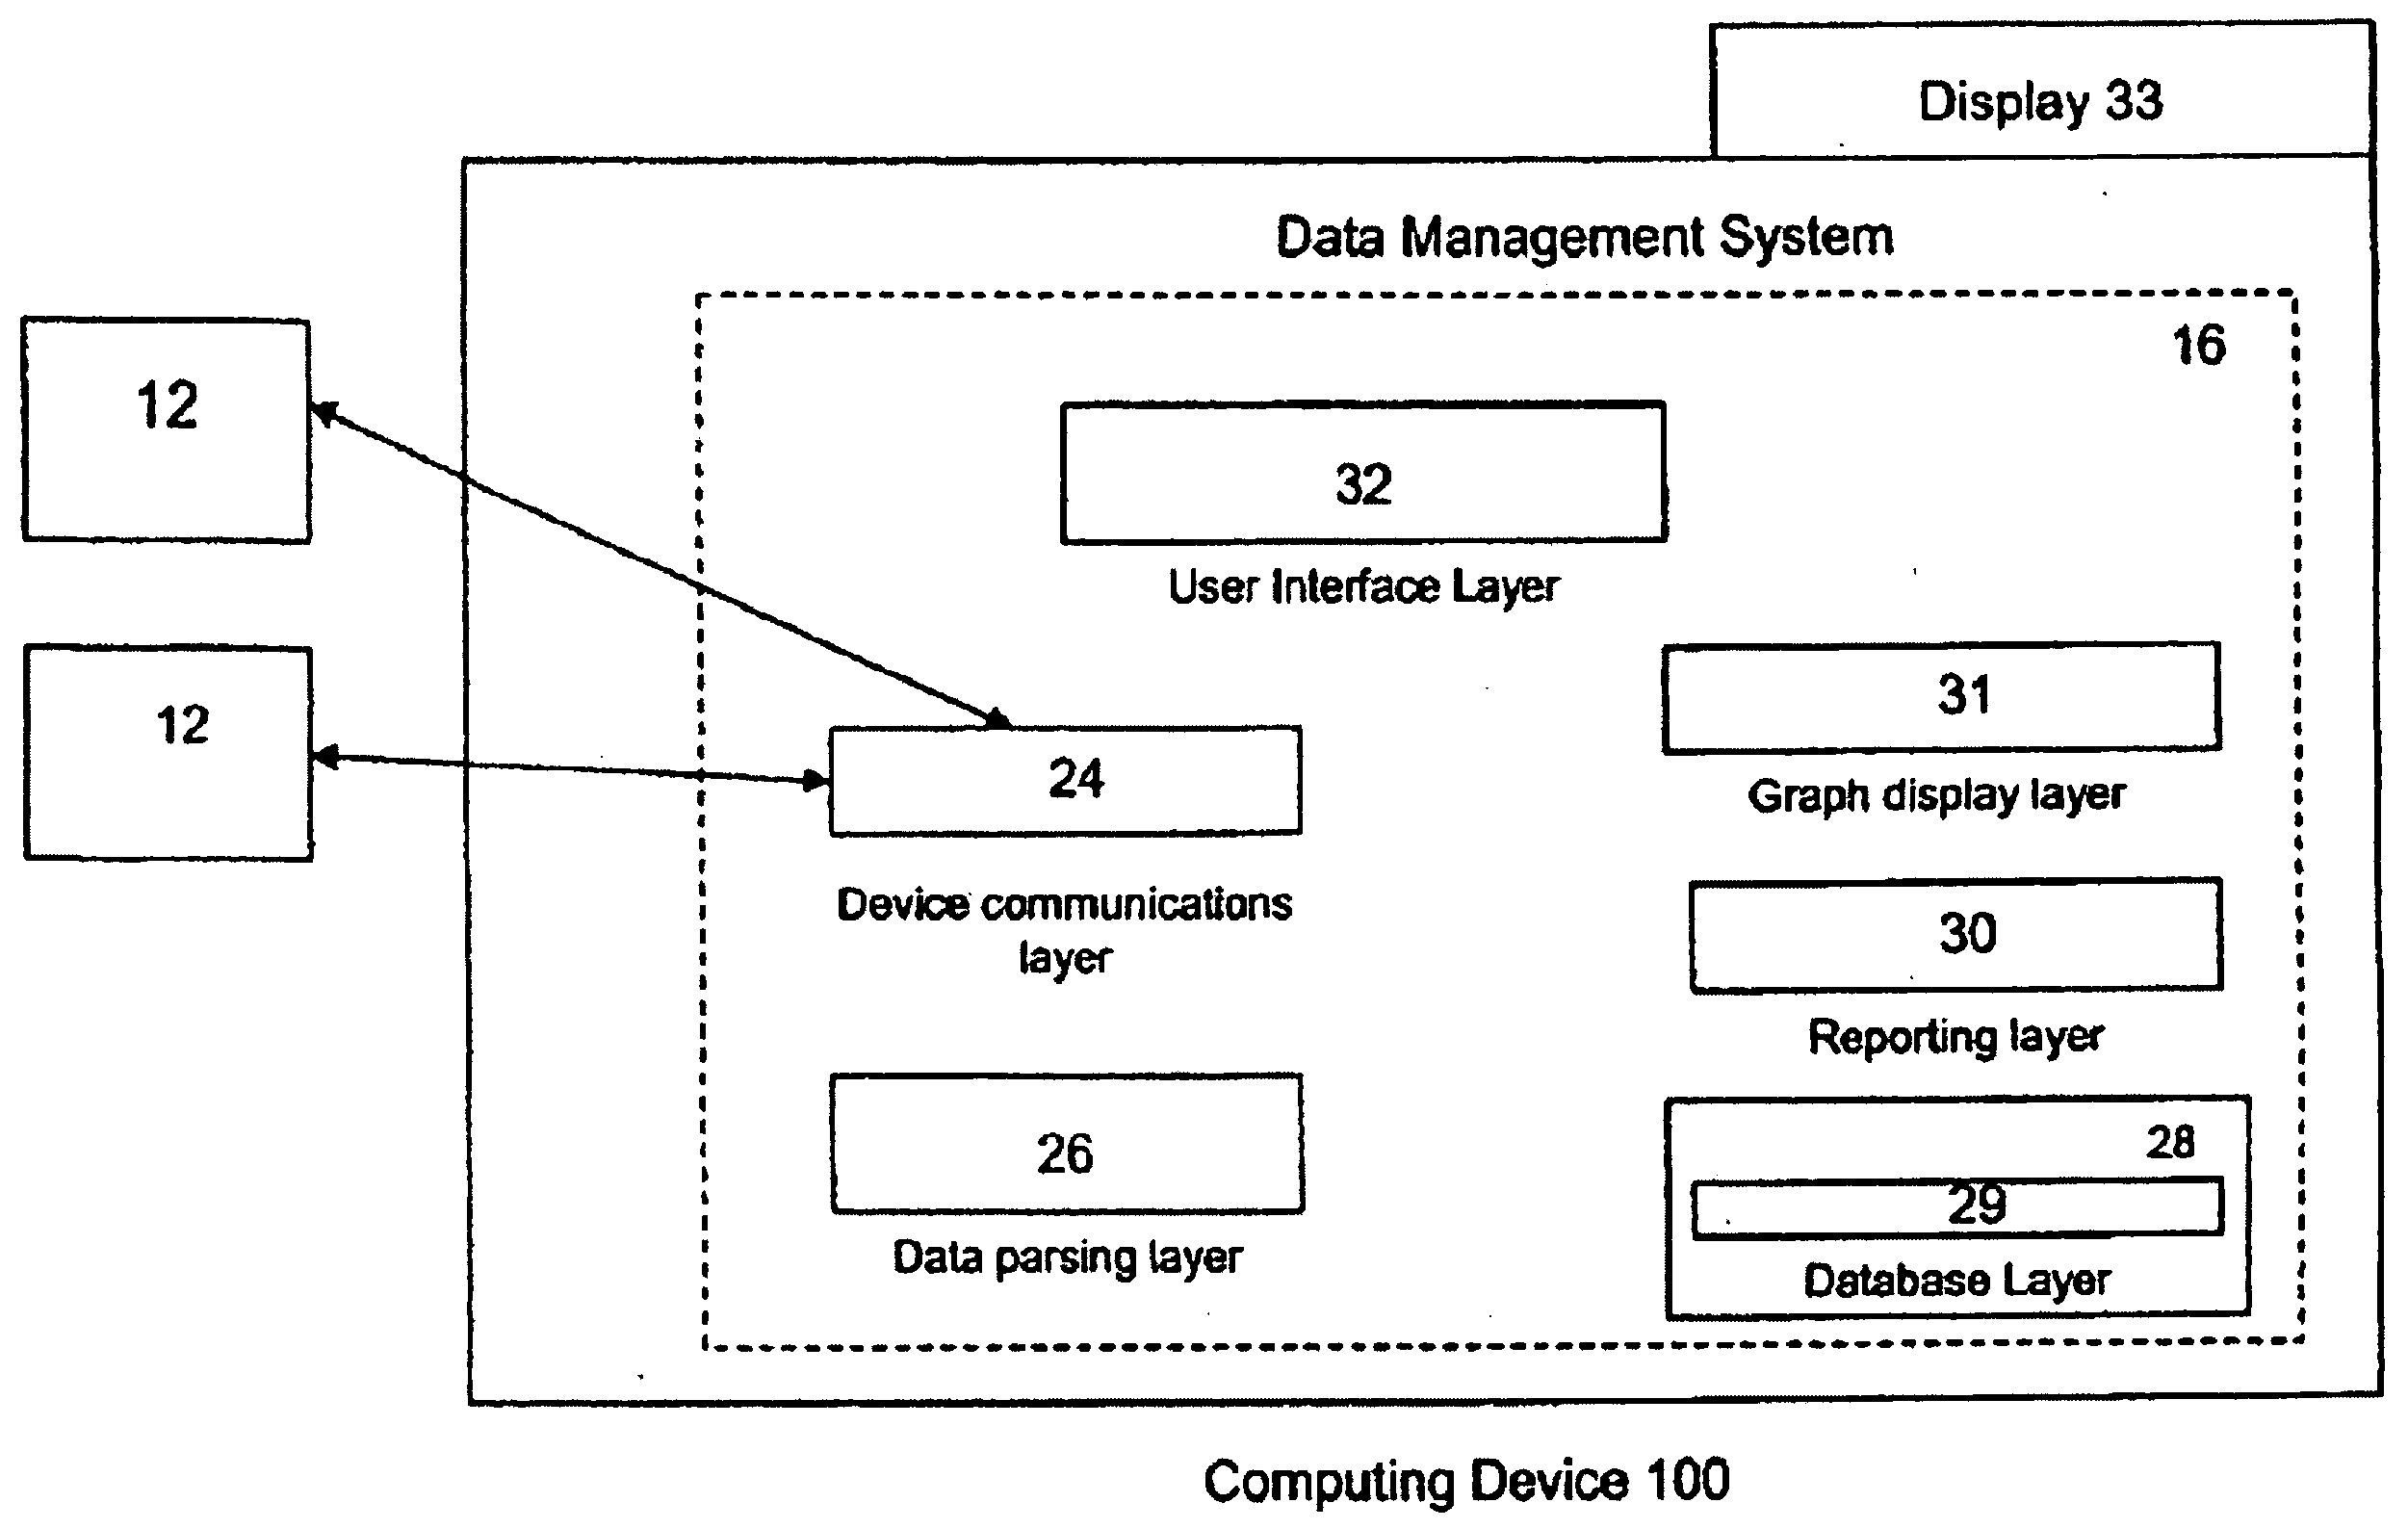 Pattern Recognition and Filtering in a Therapy Management System